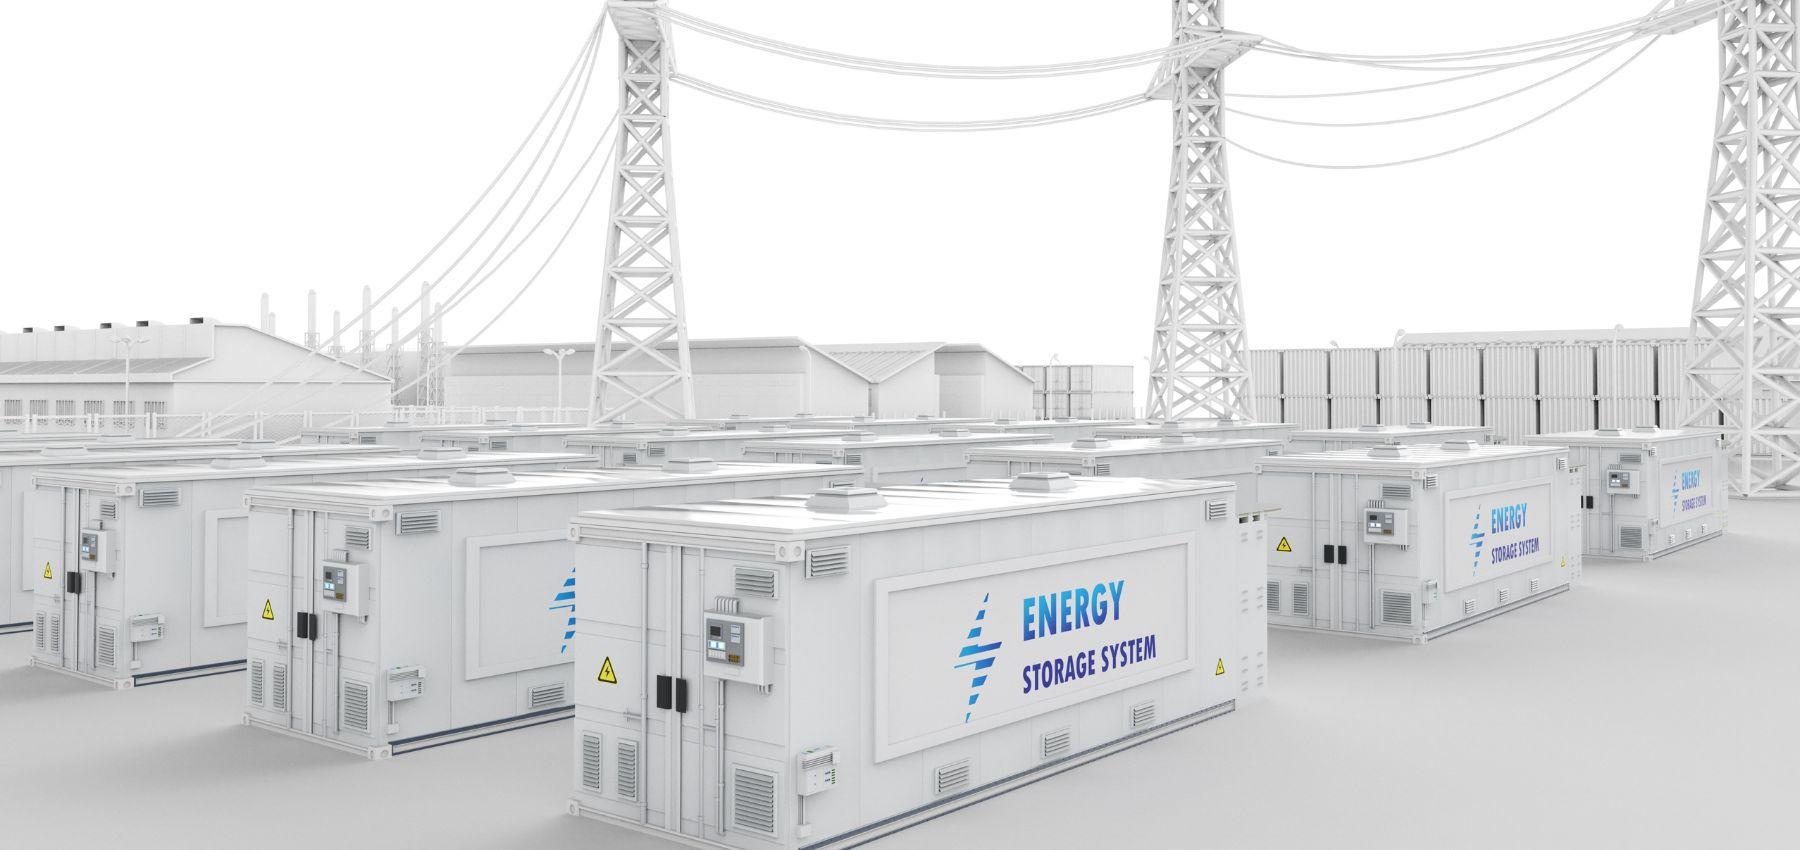 A number of big batteries in storage containers sit in front of high tension power transmission lines concept image